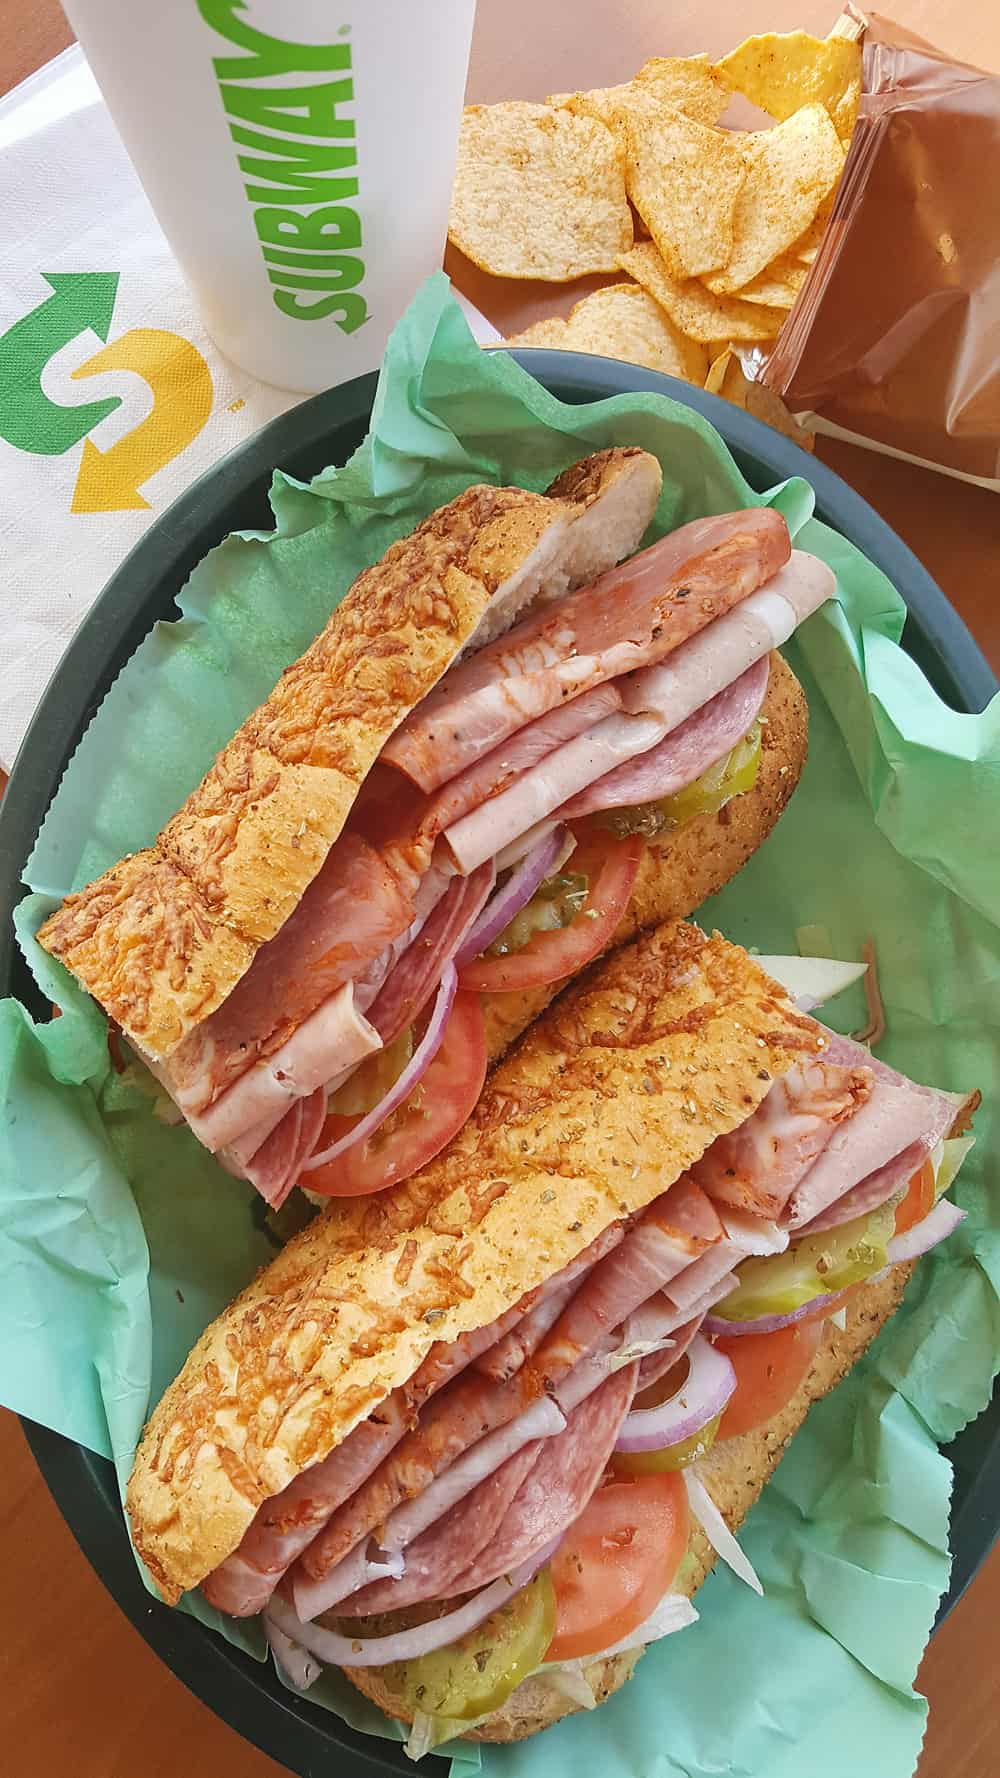 SUBWAY Italian Hero is a flavorful sub sandwich with authentic Italian flavors. Fresh bread is topped with Capicola, Mortadella, Genoa Salami, Provolone, your preferred veggies, oregano, oil and red wine vinegar for a delicious and convenient meal. 